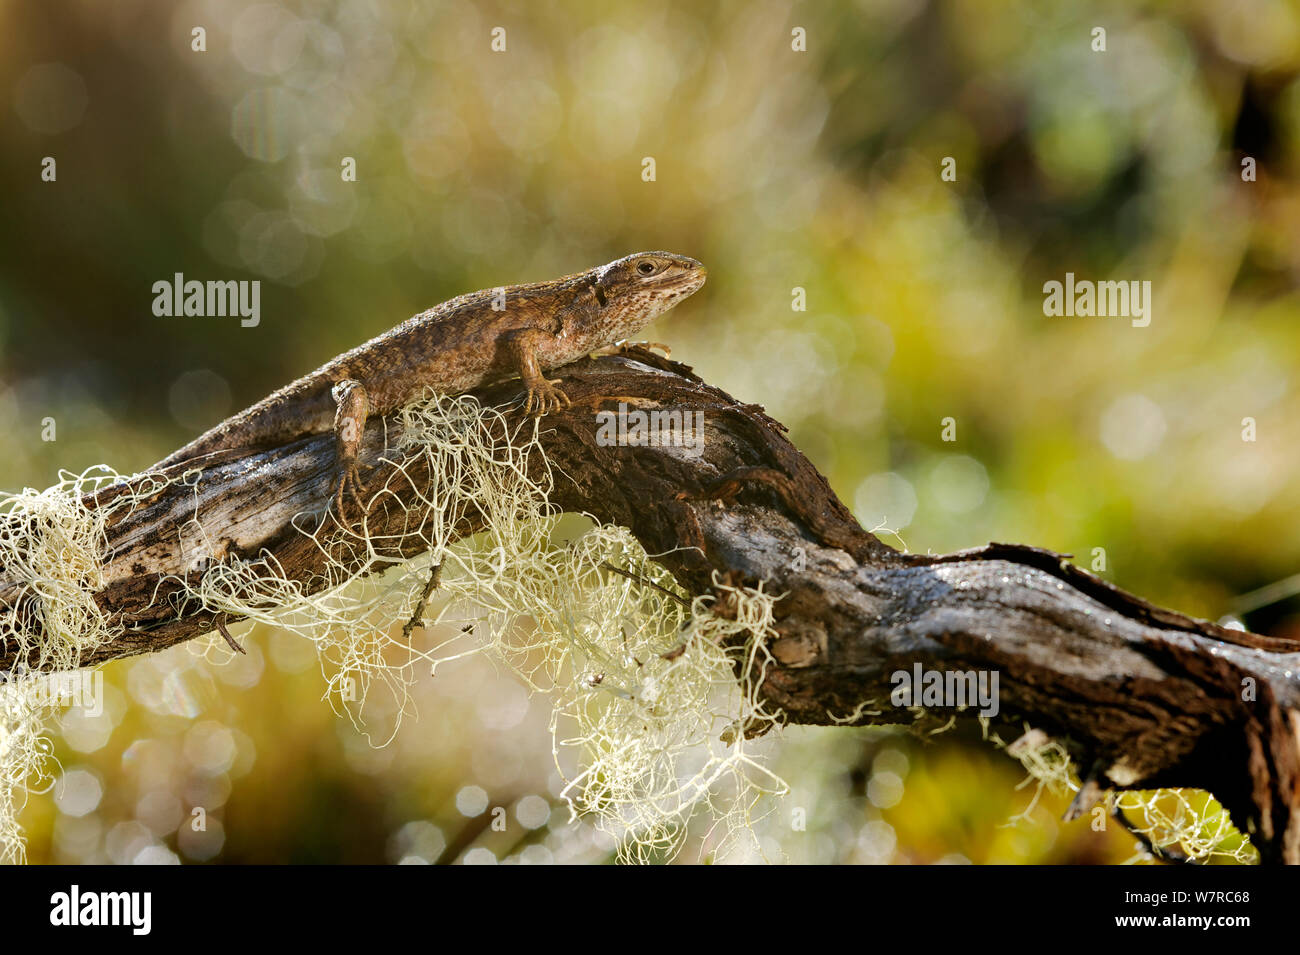 Chilean Tree Iguana (Liolaemus chiliensis) basking on a branch with lichens, Nahuelbuta National Park, Chile, December Stock Photo